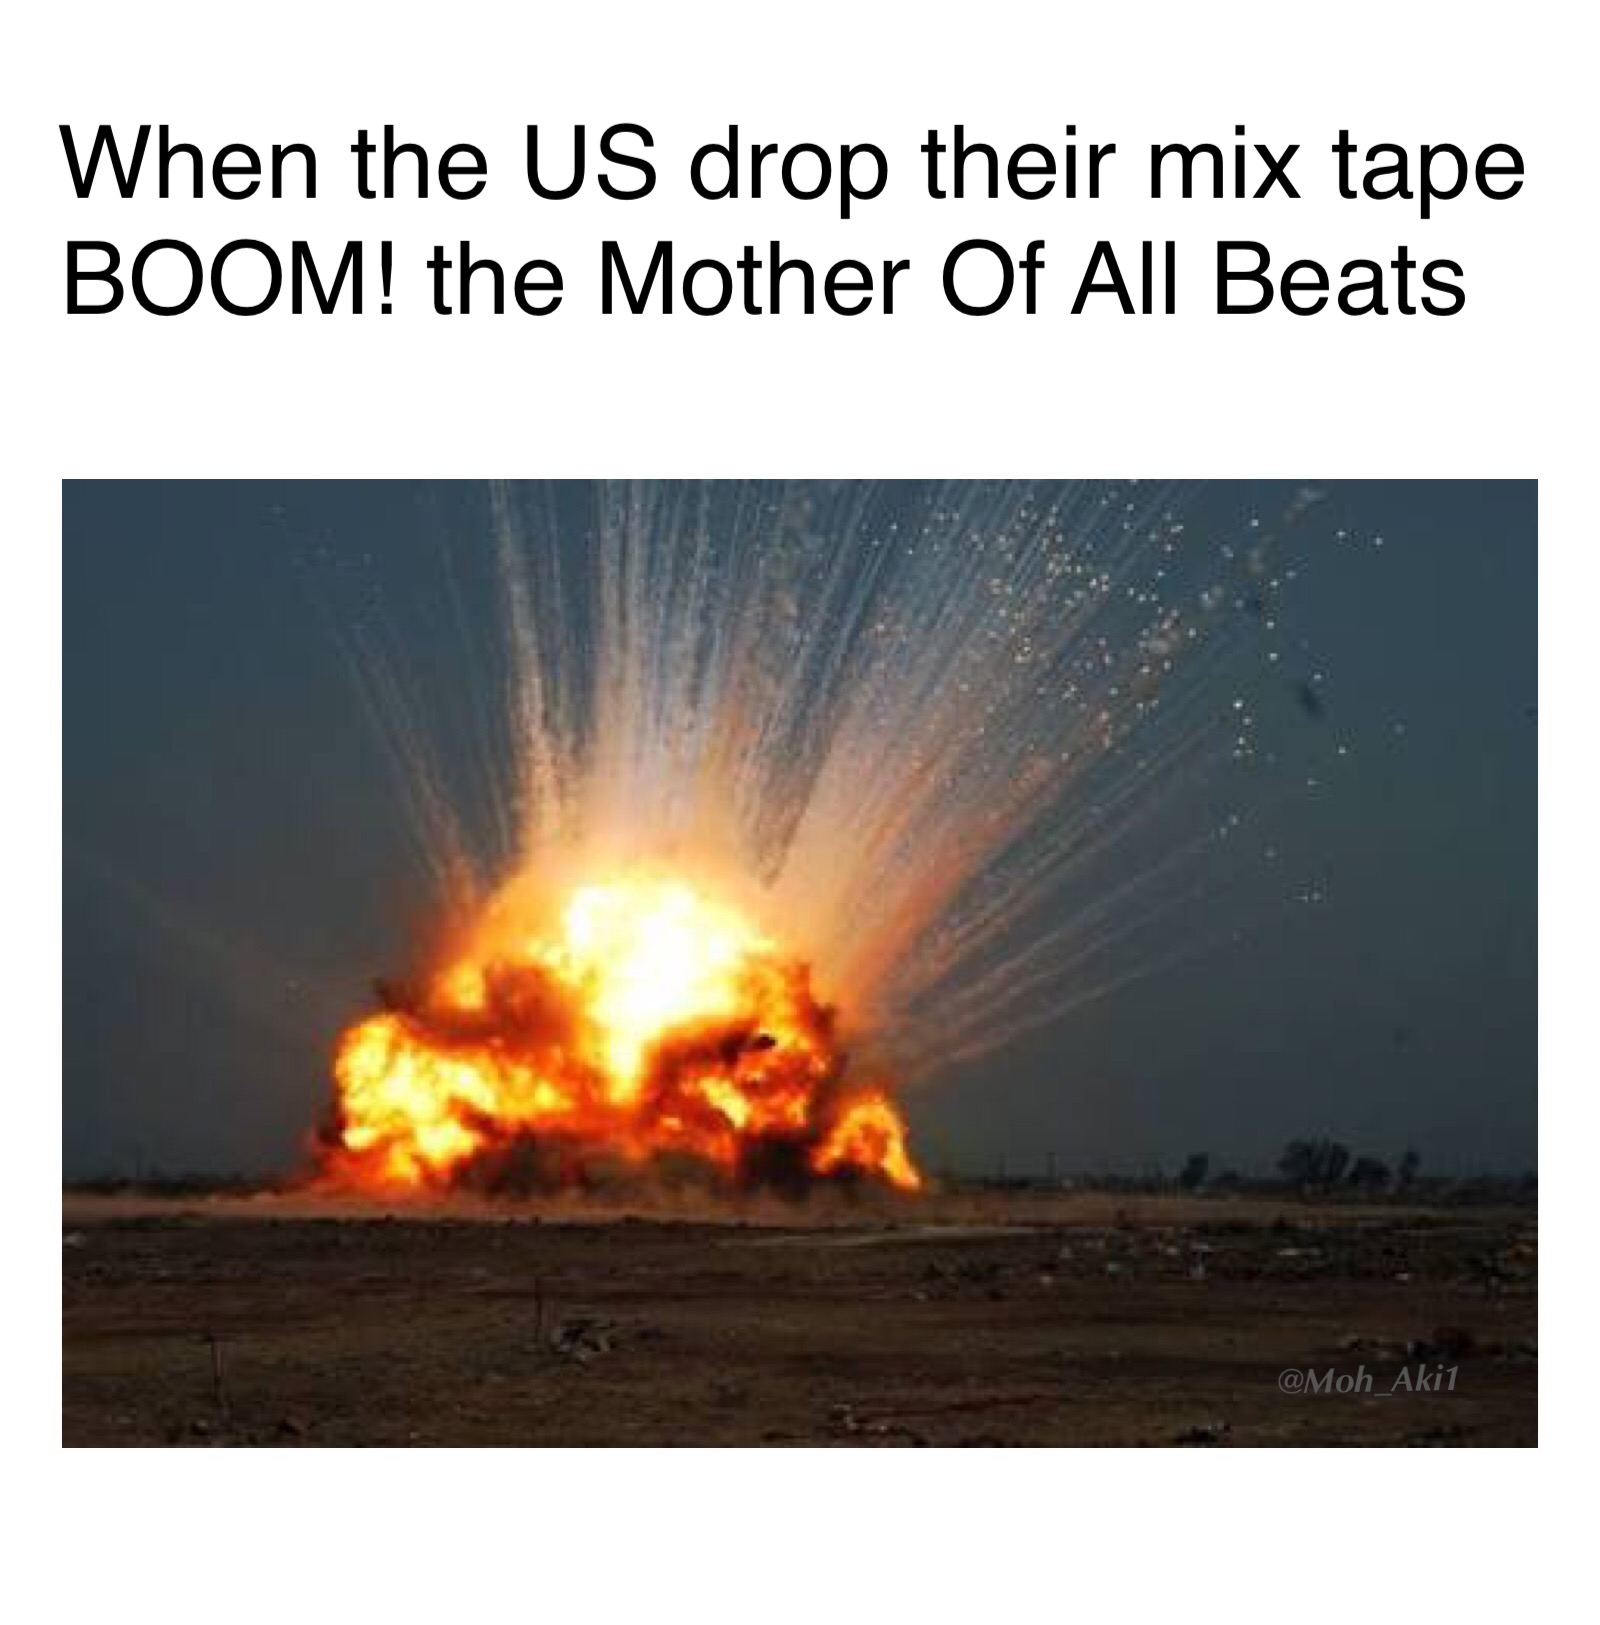 memes - warhammer 40k ork memes - When the Us drop their mix tape Boom! the Mother Of All Beats